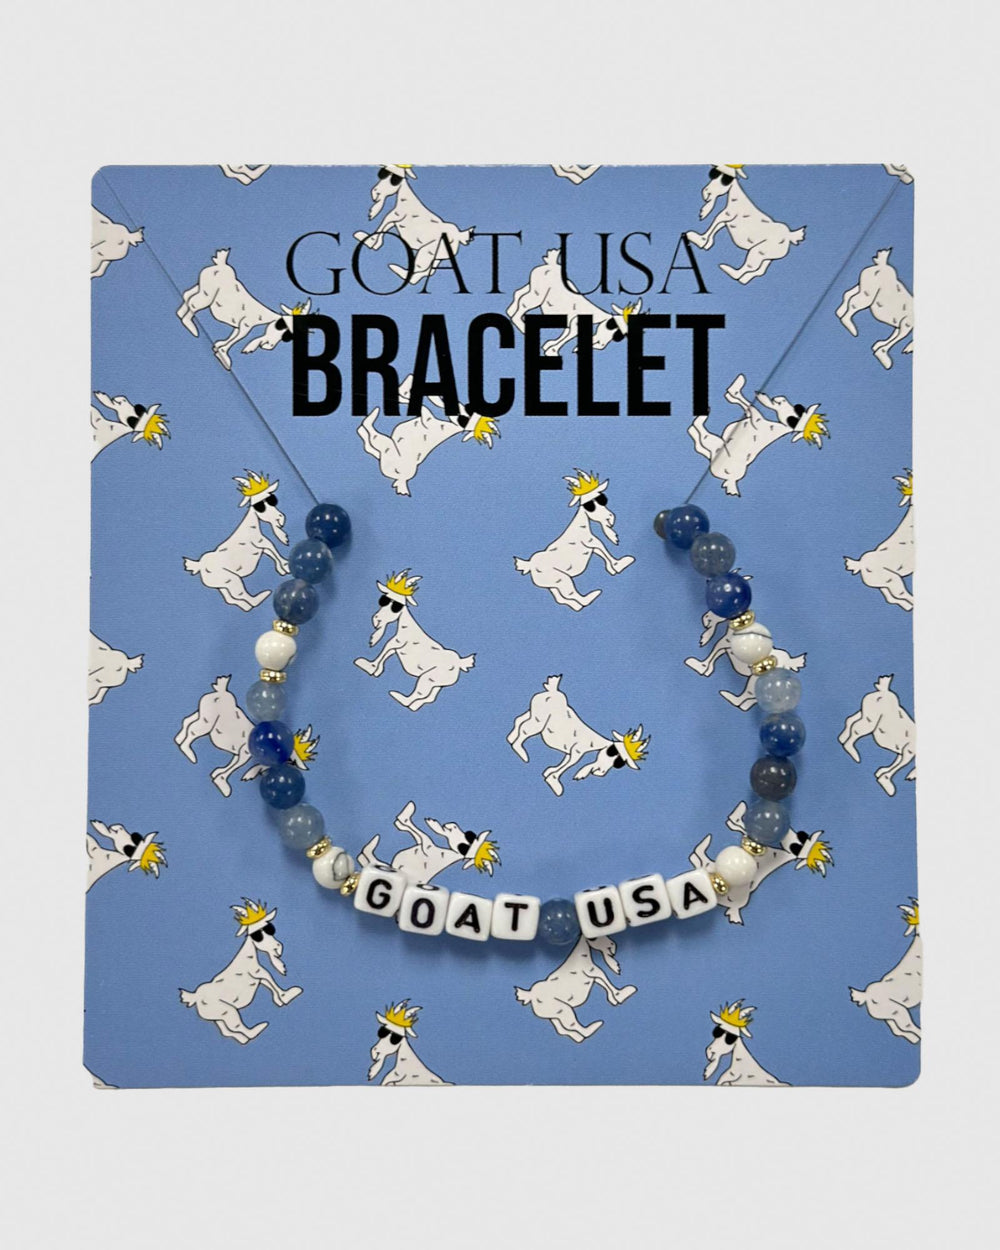 Beaded bracelet displayed on blue card with cartoon goats